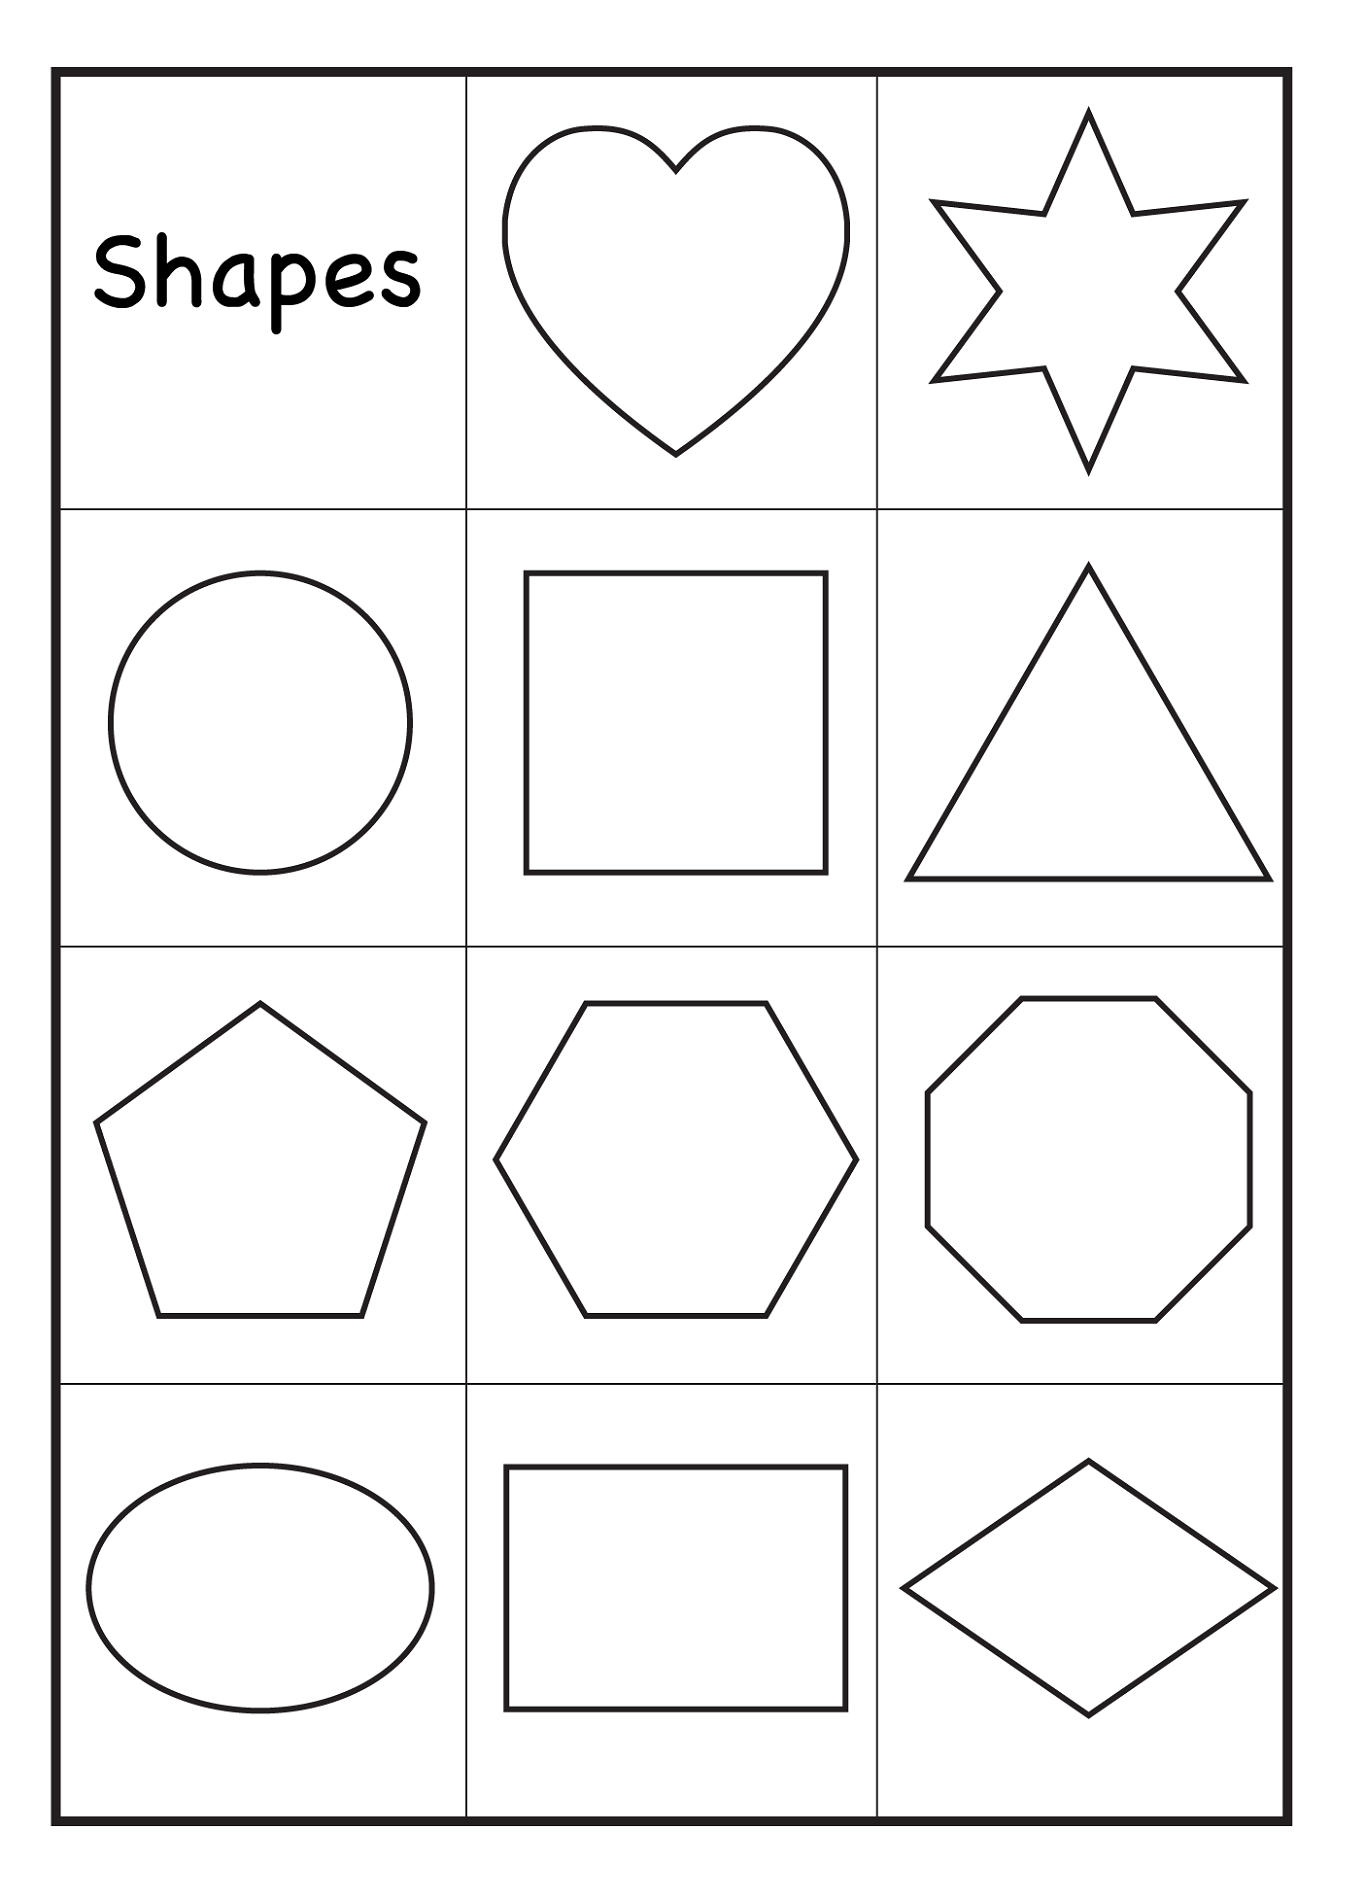 color-by-shapes-worksheets-activity-shelter